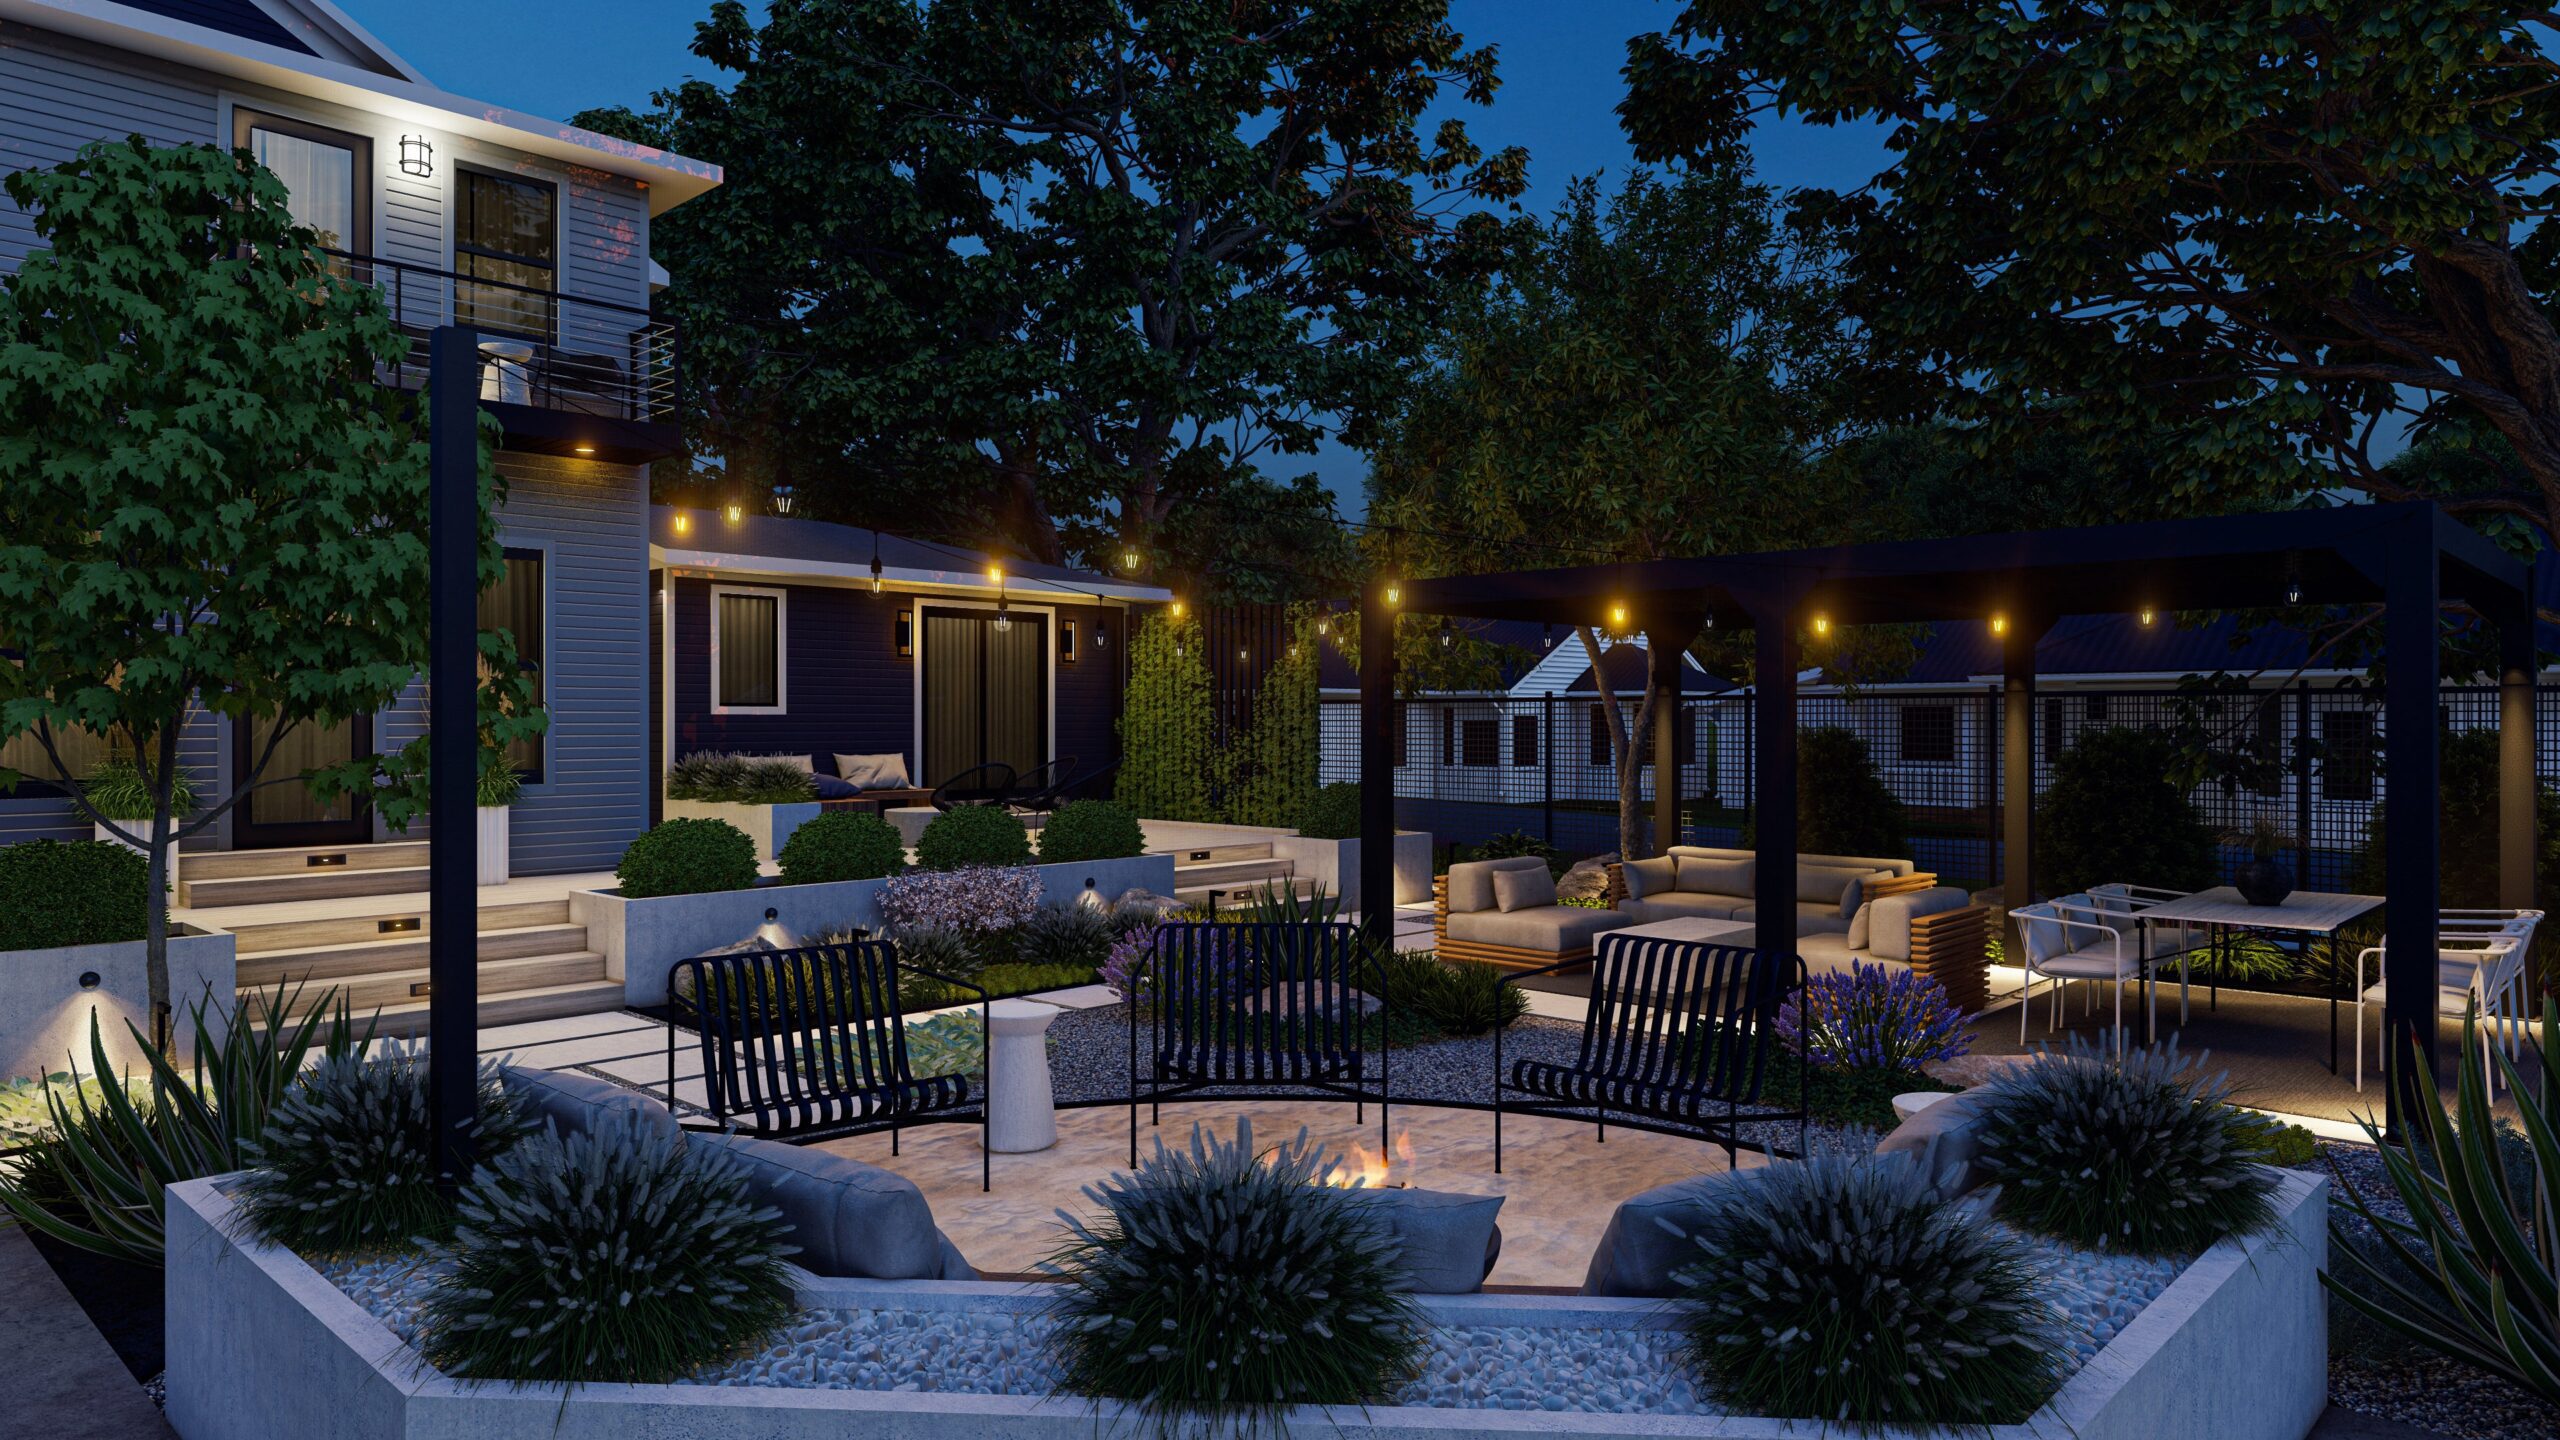 Night time view of Outdoor Oasis rendering dream space.